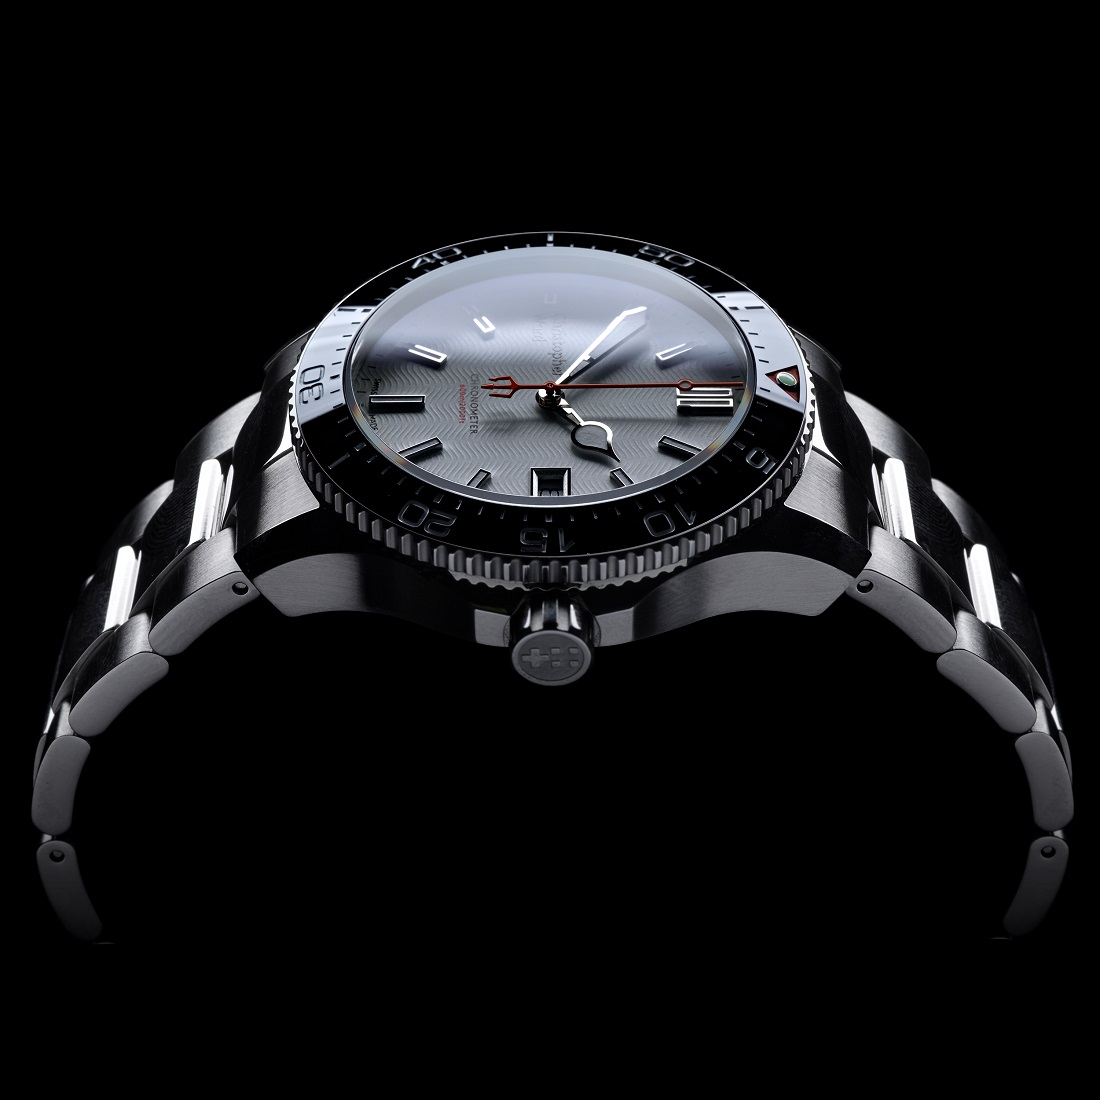 Christopher Ward Launches #TridentSummer & Two New C60 Trident Dive Watches Watch Releases 